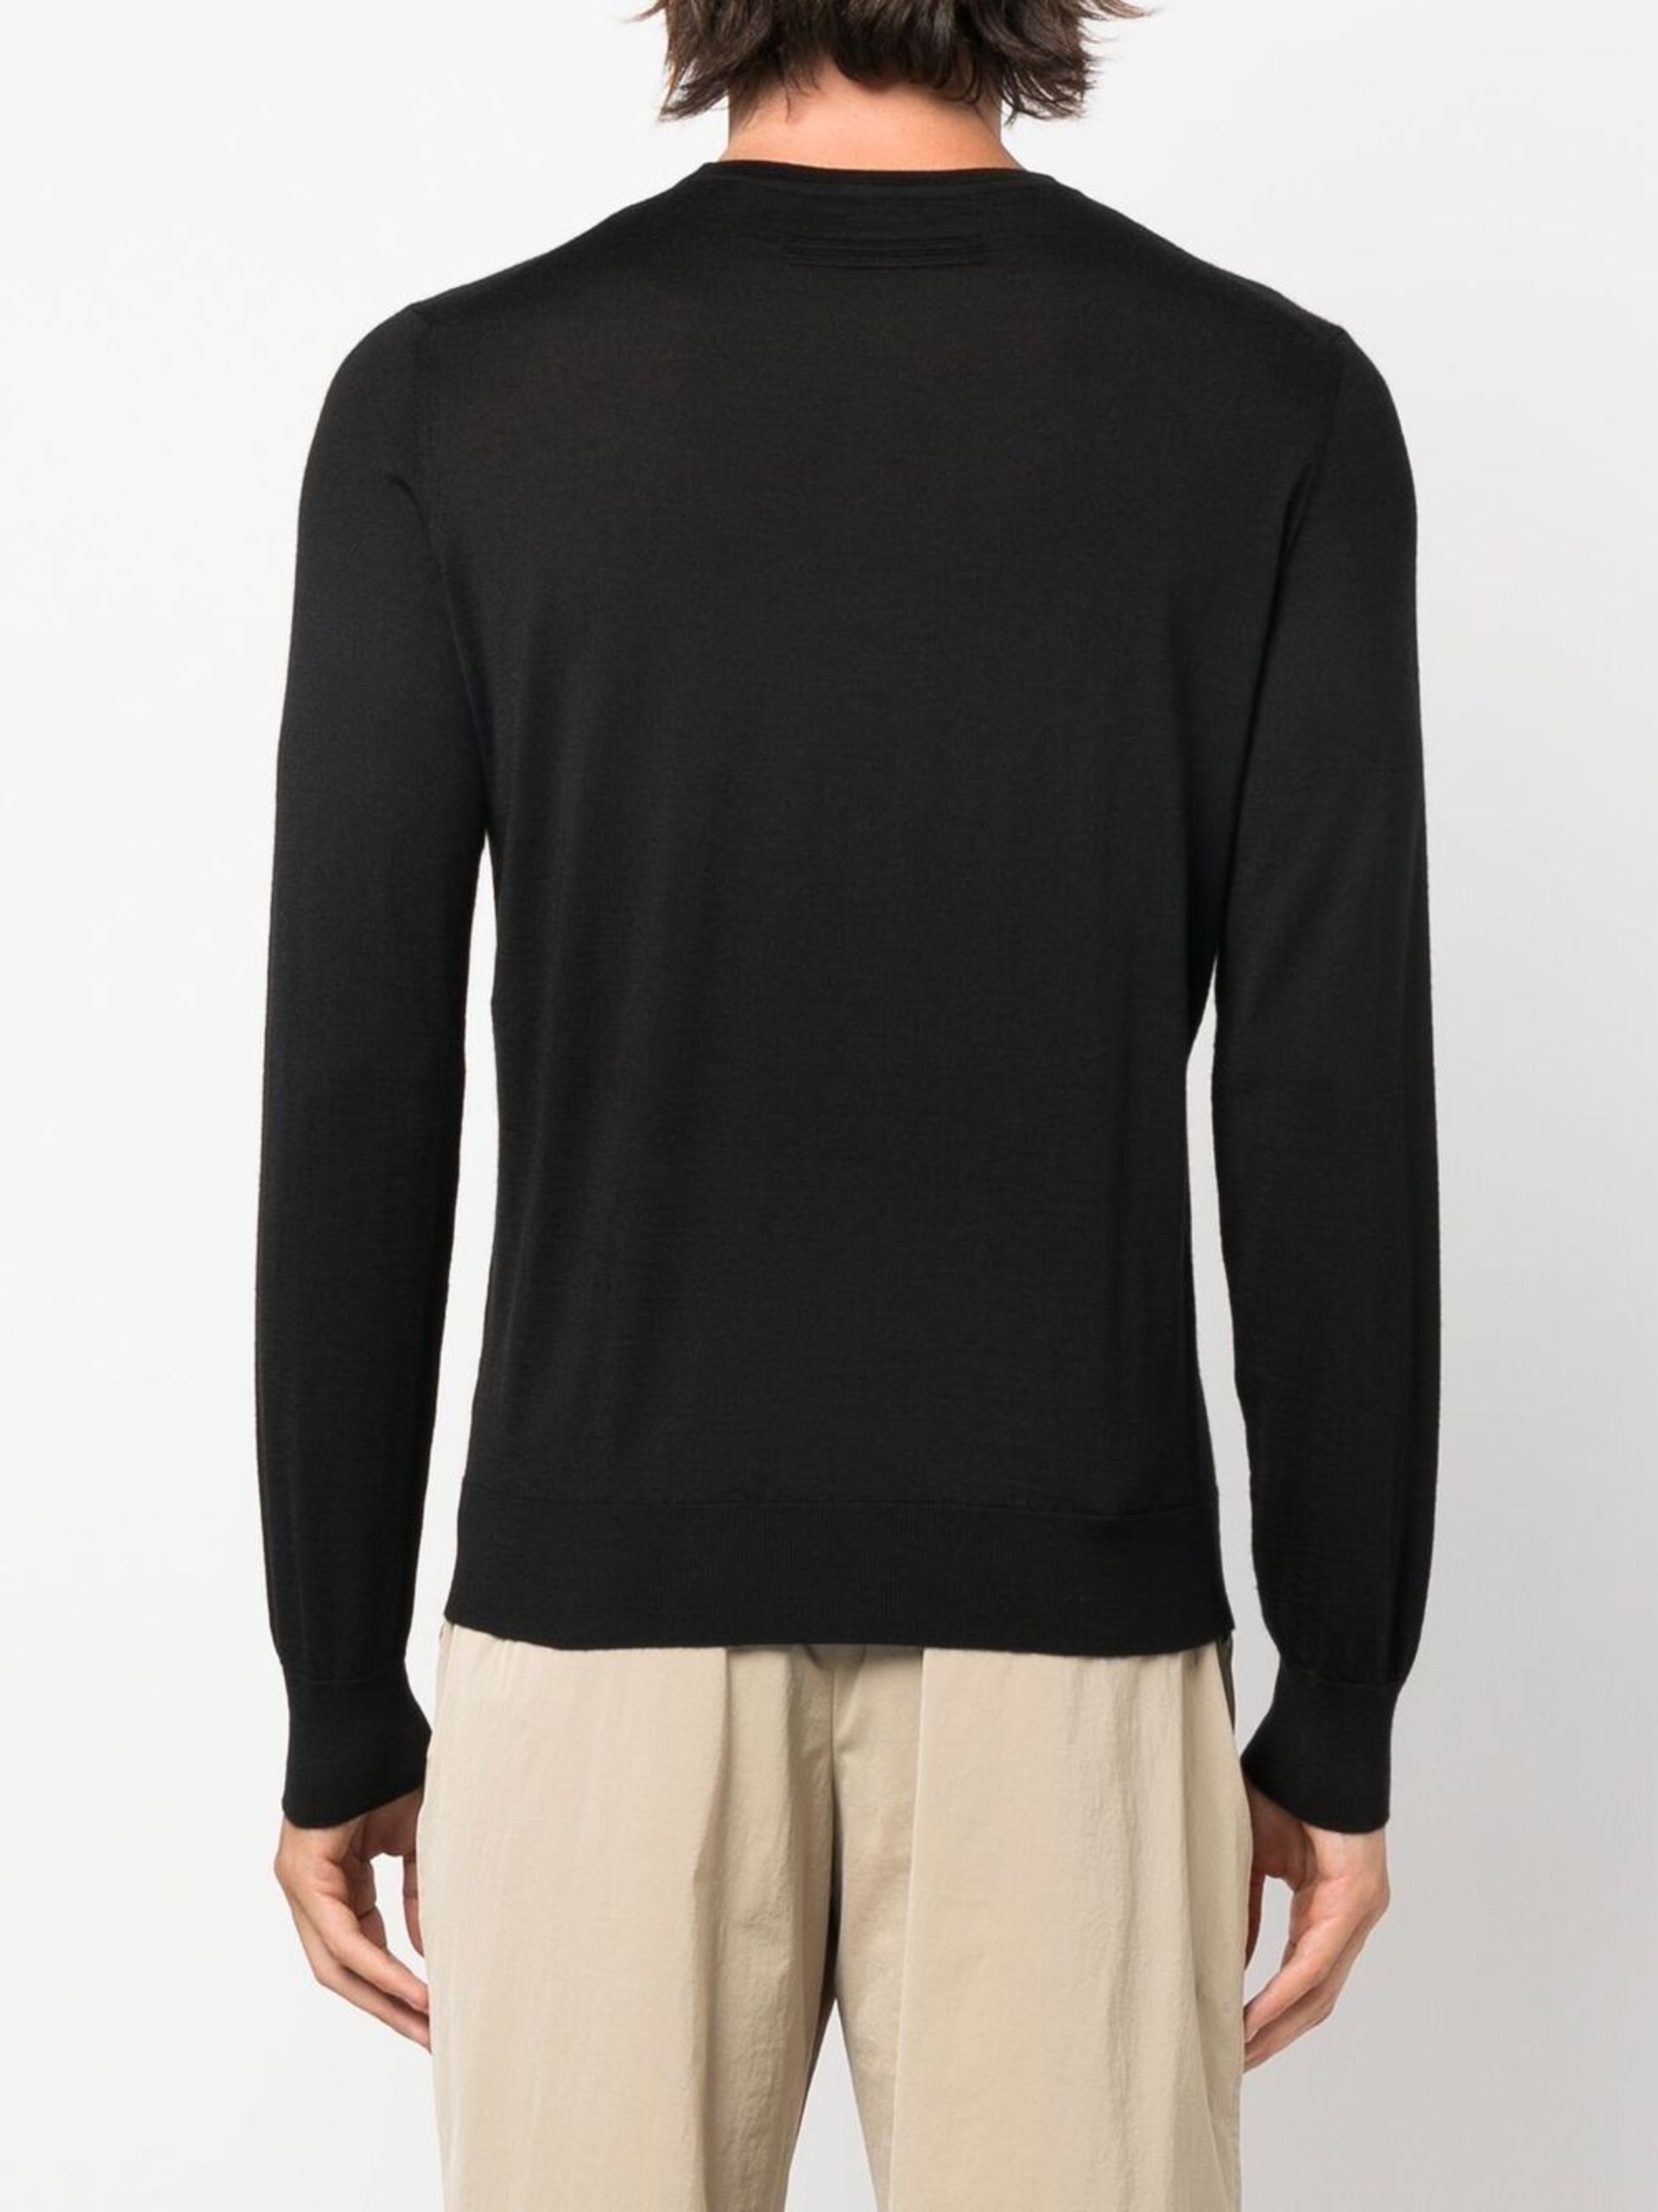 Black Knitted Sweater - 4